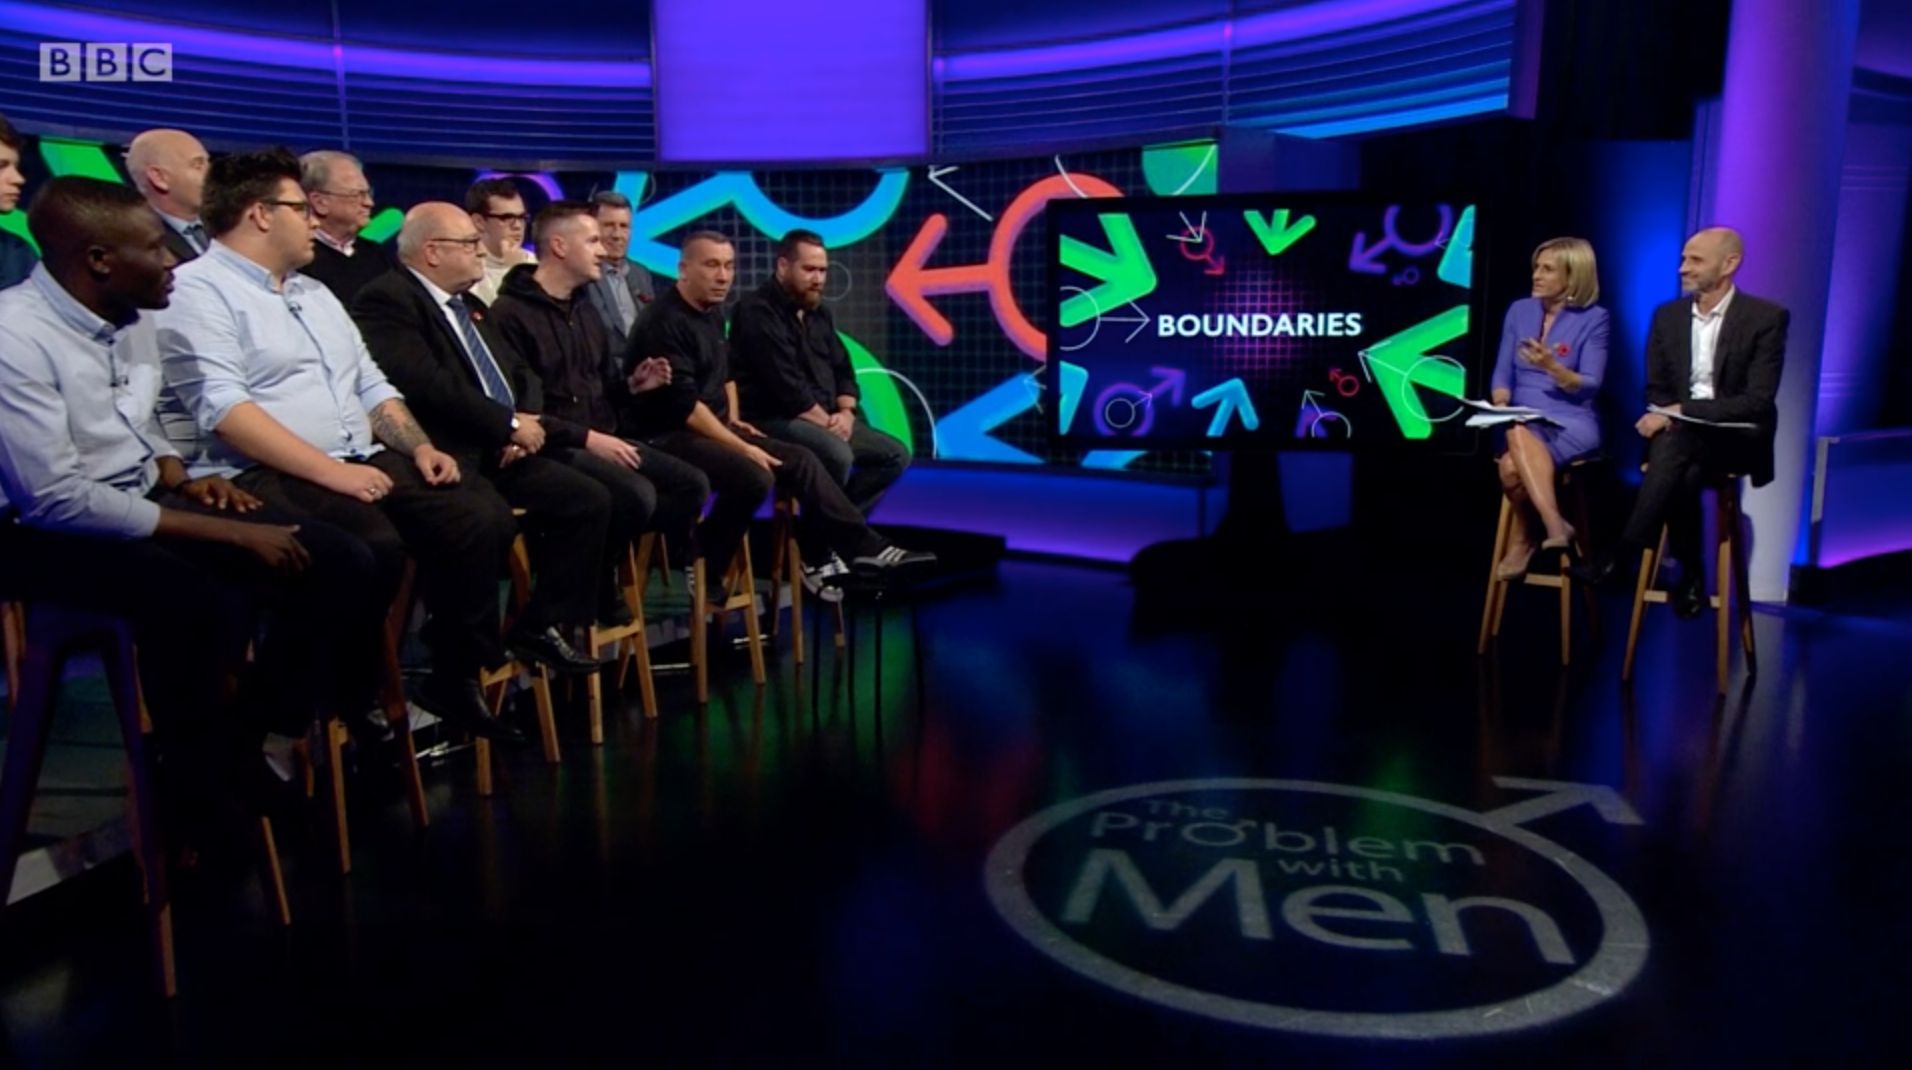 12 Angry Men: The panel alongside hosts Evan Davis and Emily Maitlis